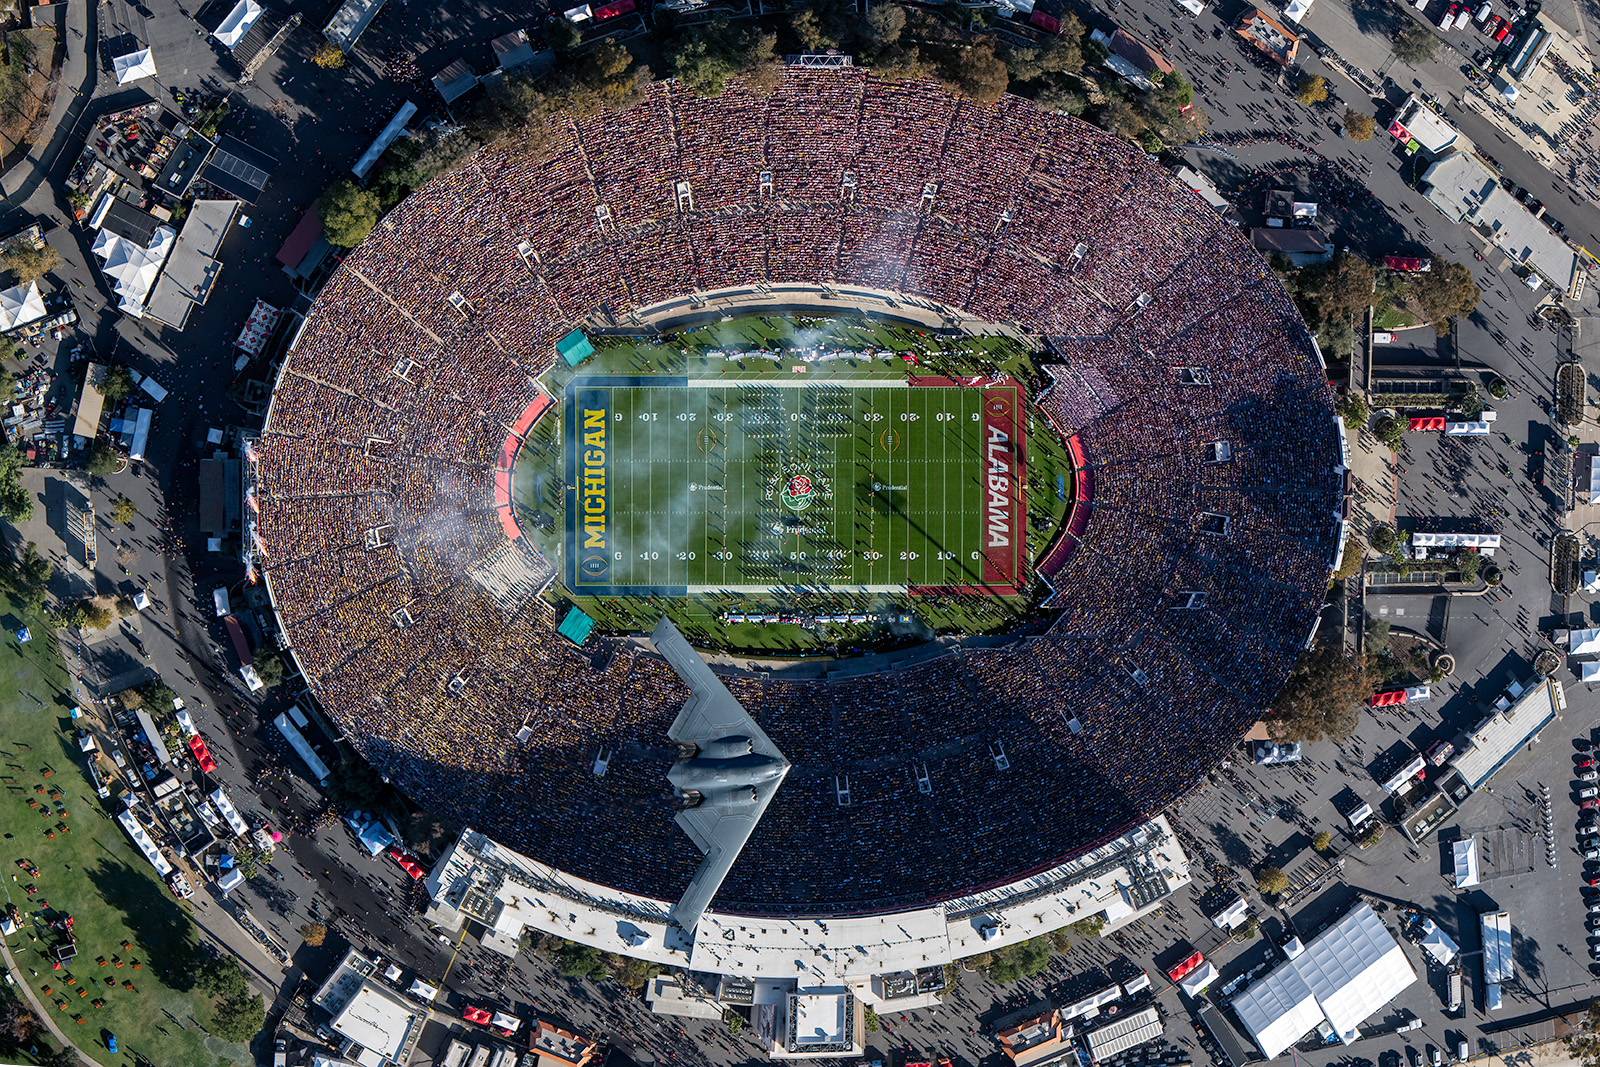 A B-2 stealth bomber flies over the soldout stadium during the 2023 Rose Bowl Game